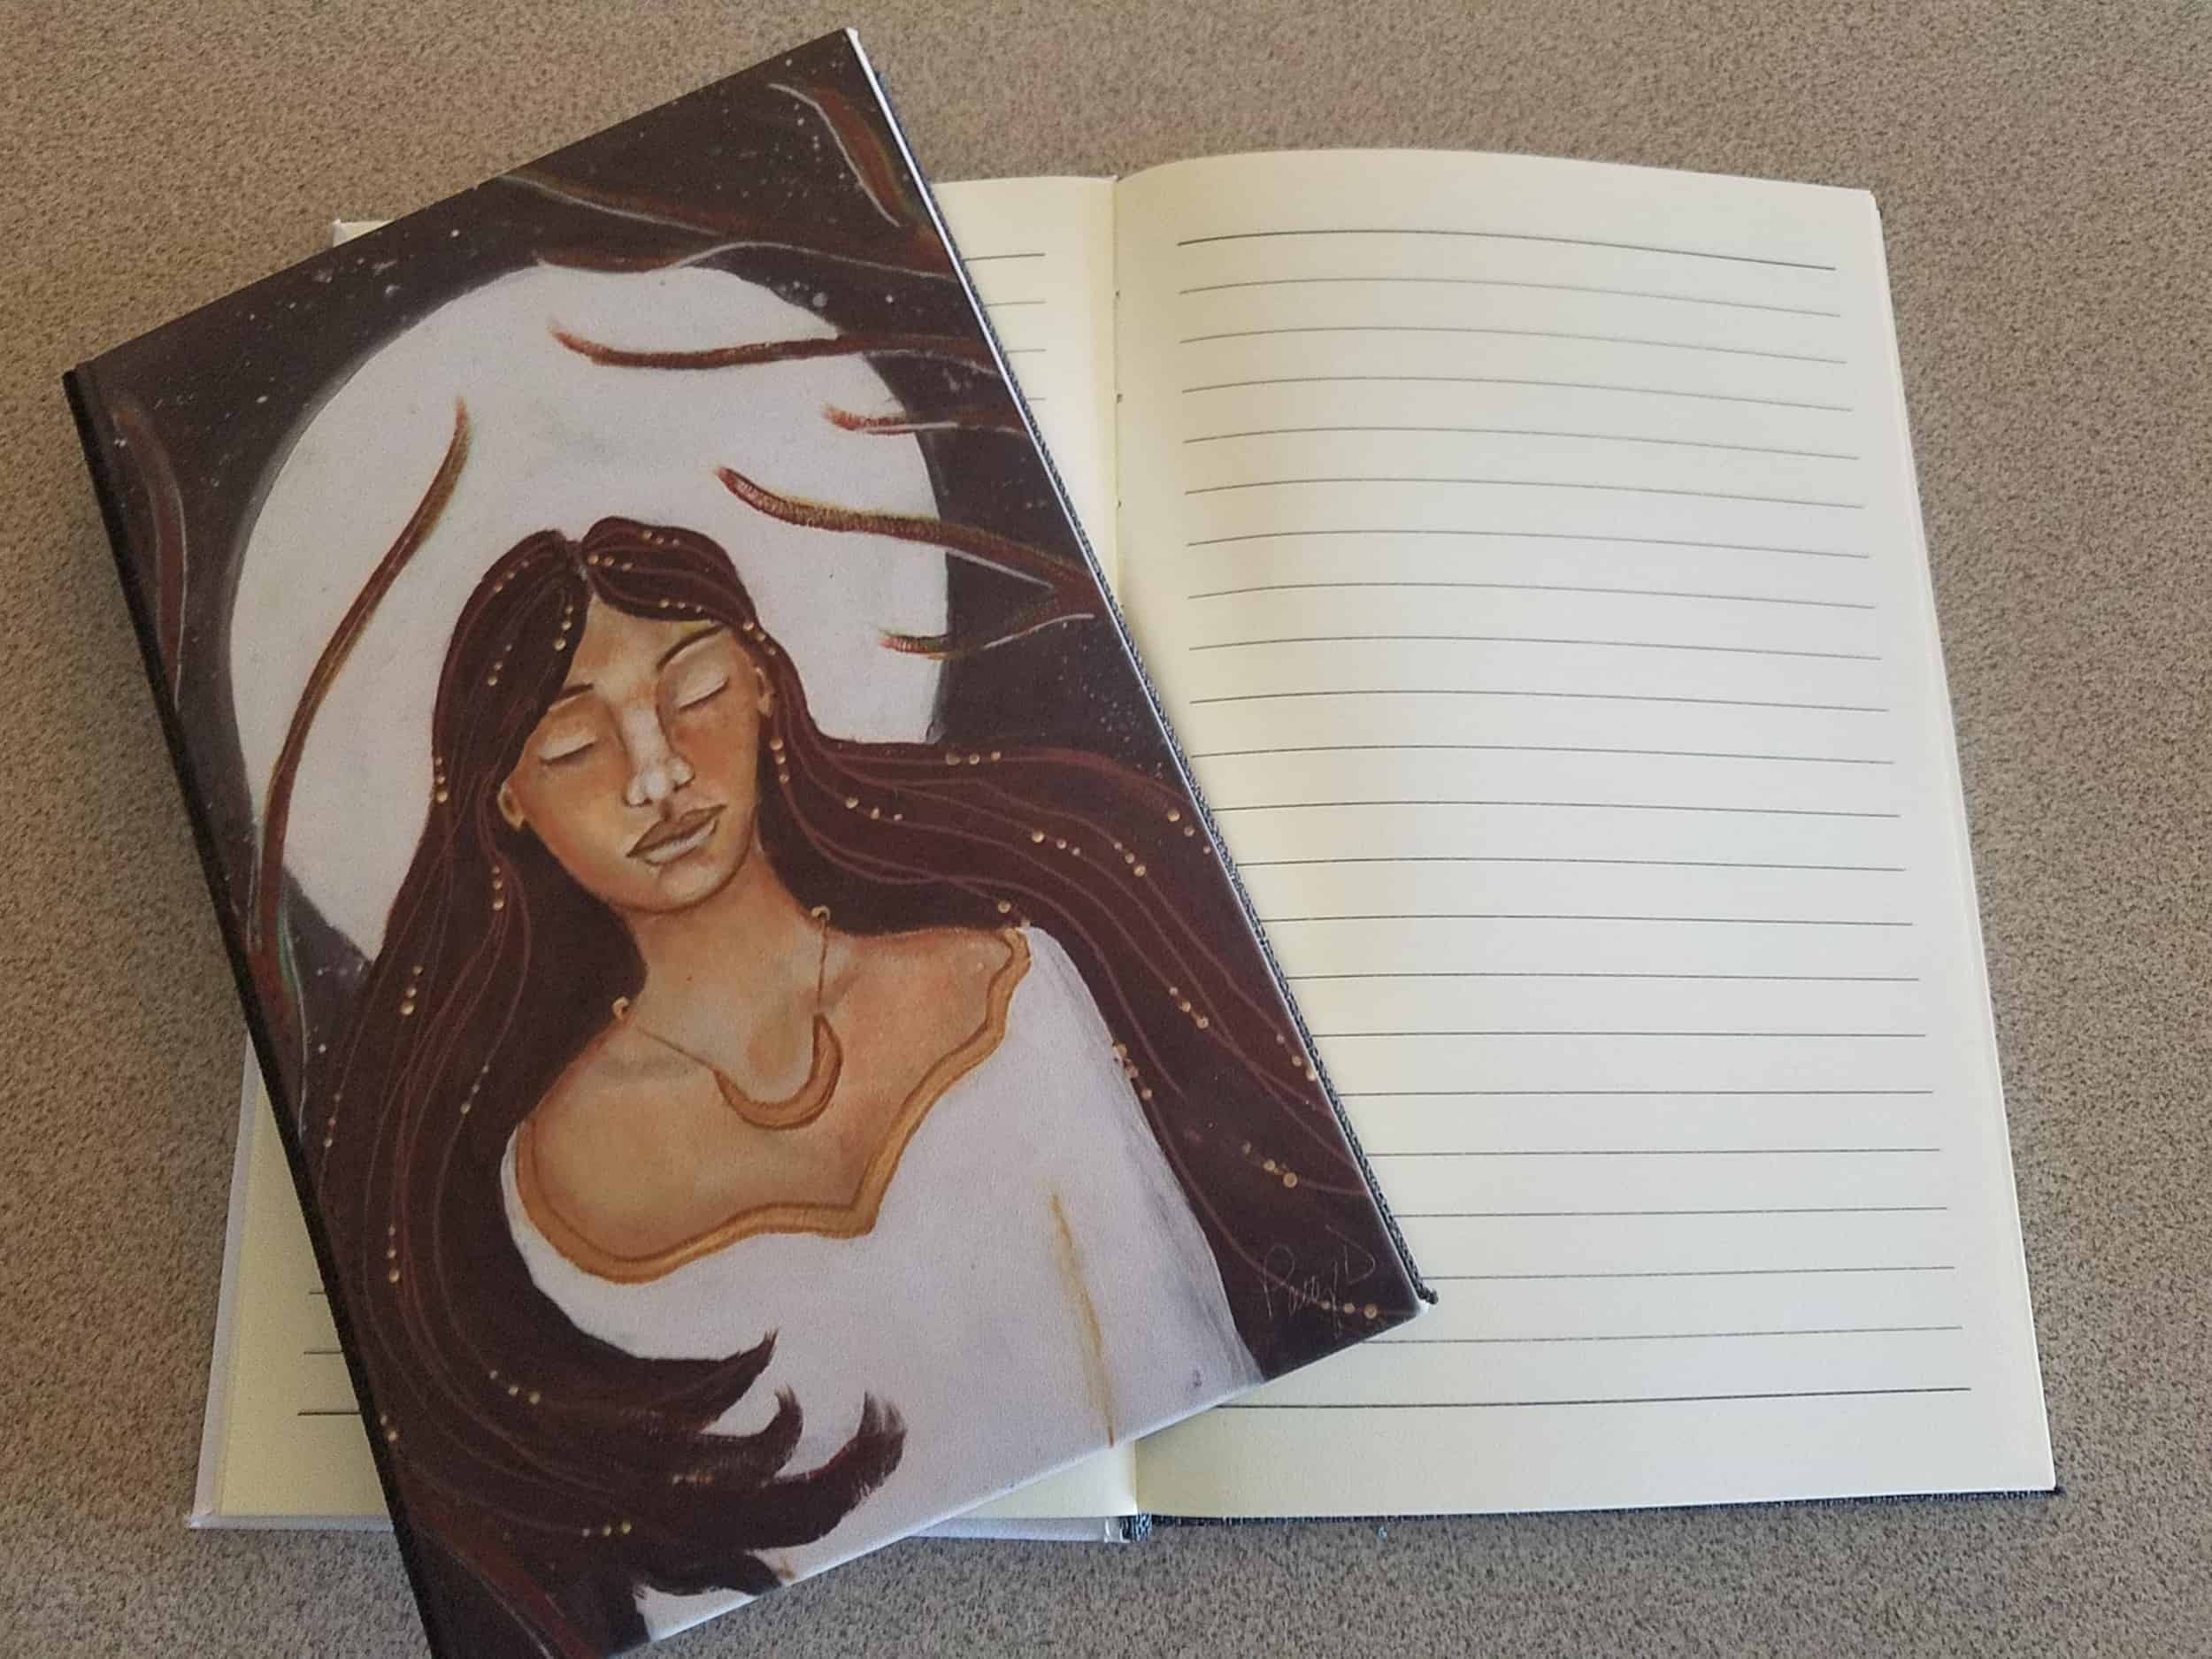 This "Moon Dreamer" Journal is made with love by Studio Patty D! Shop more unique gift ideas today with Spots Initiatives, the best way to support creators.